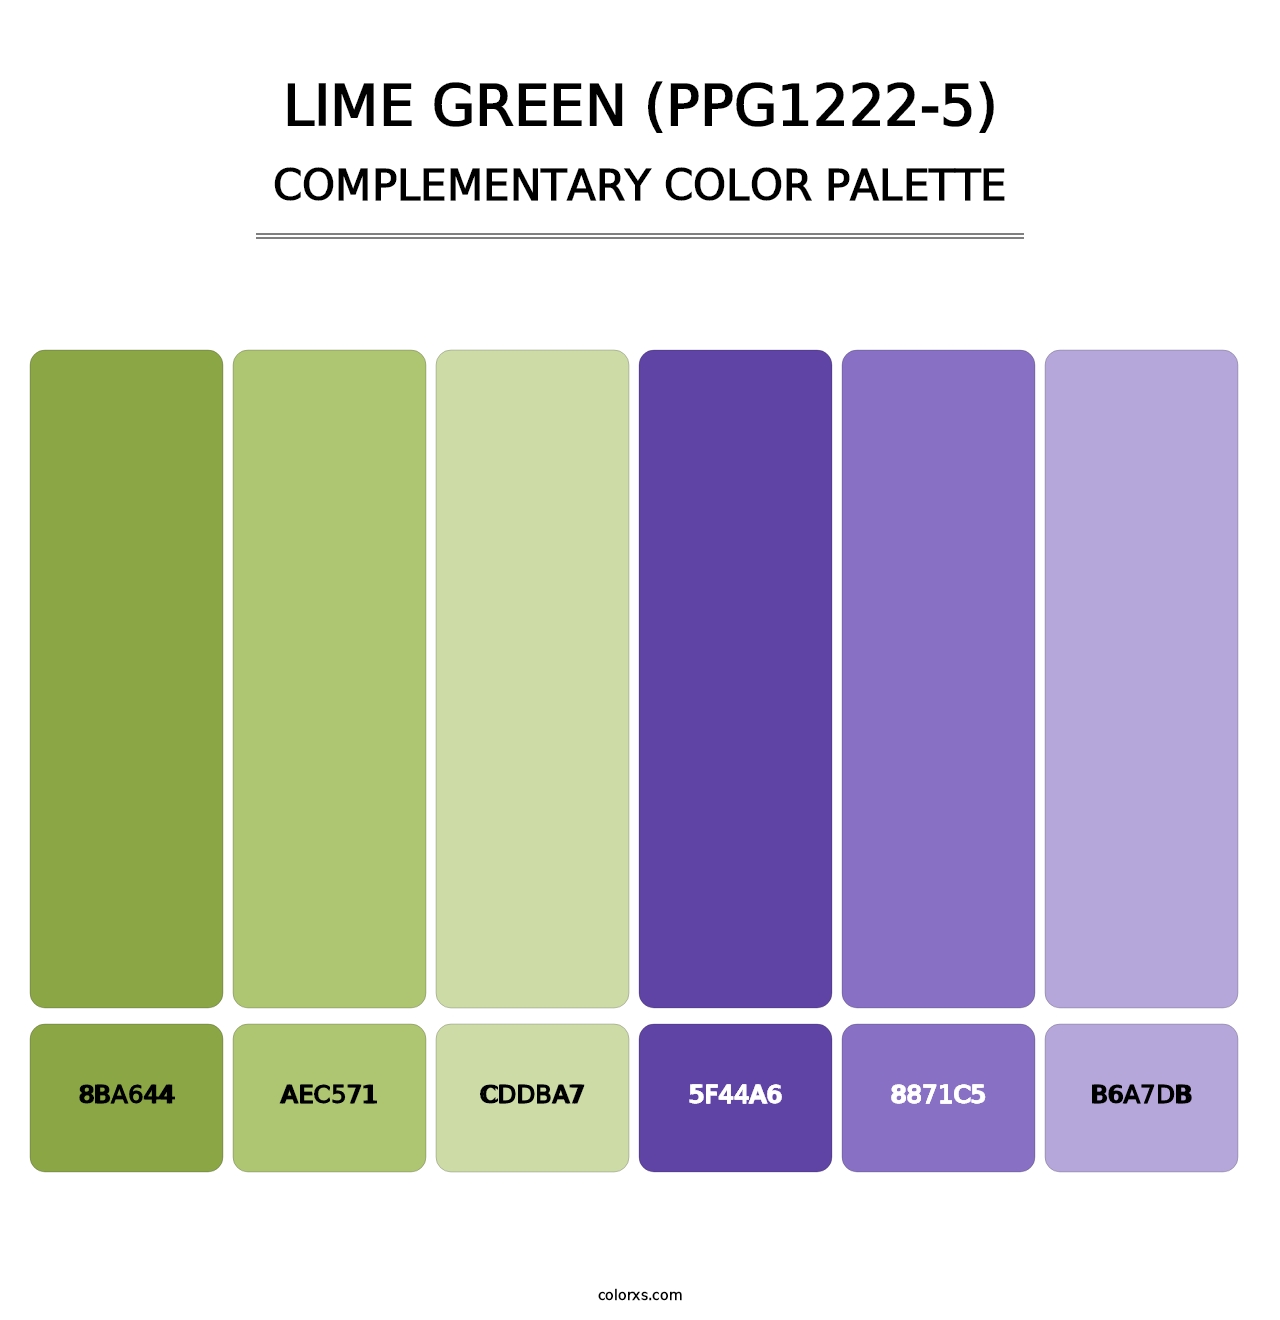 Lime Green (PPG1222-5) - Complementary Color Palette